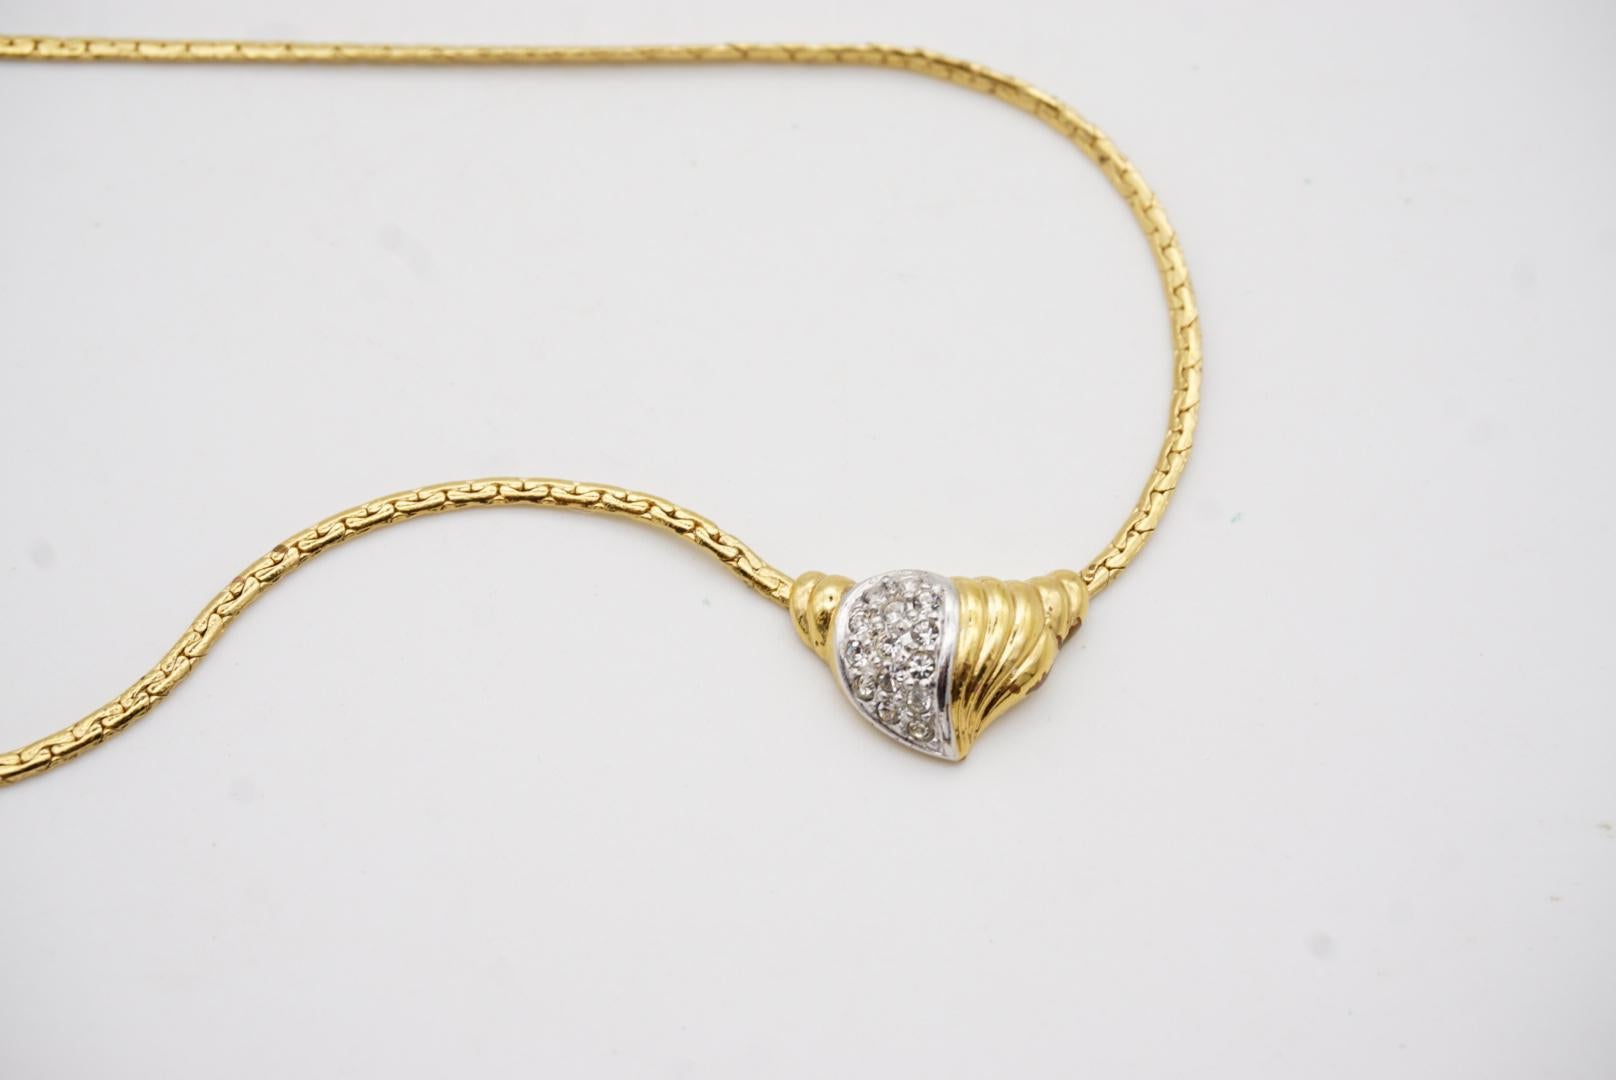 Christian Dior GROSSE 1970s Vintage Crystals Silver Gold Heart Pendant Necklace For Sale 4